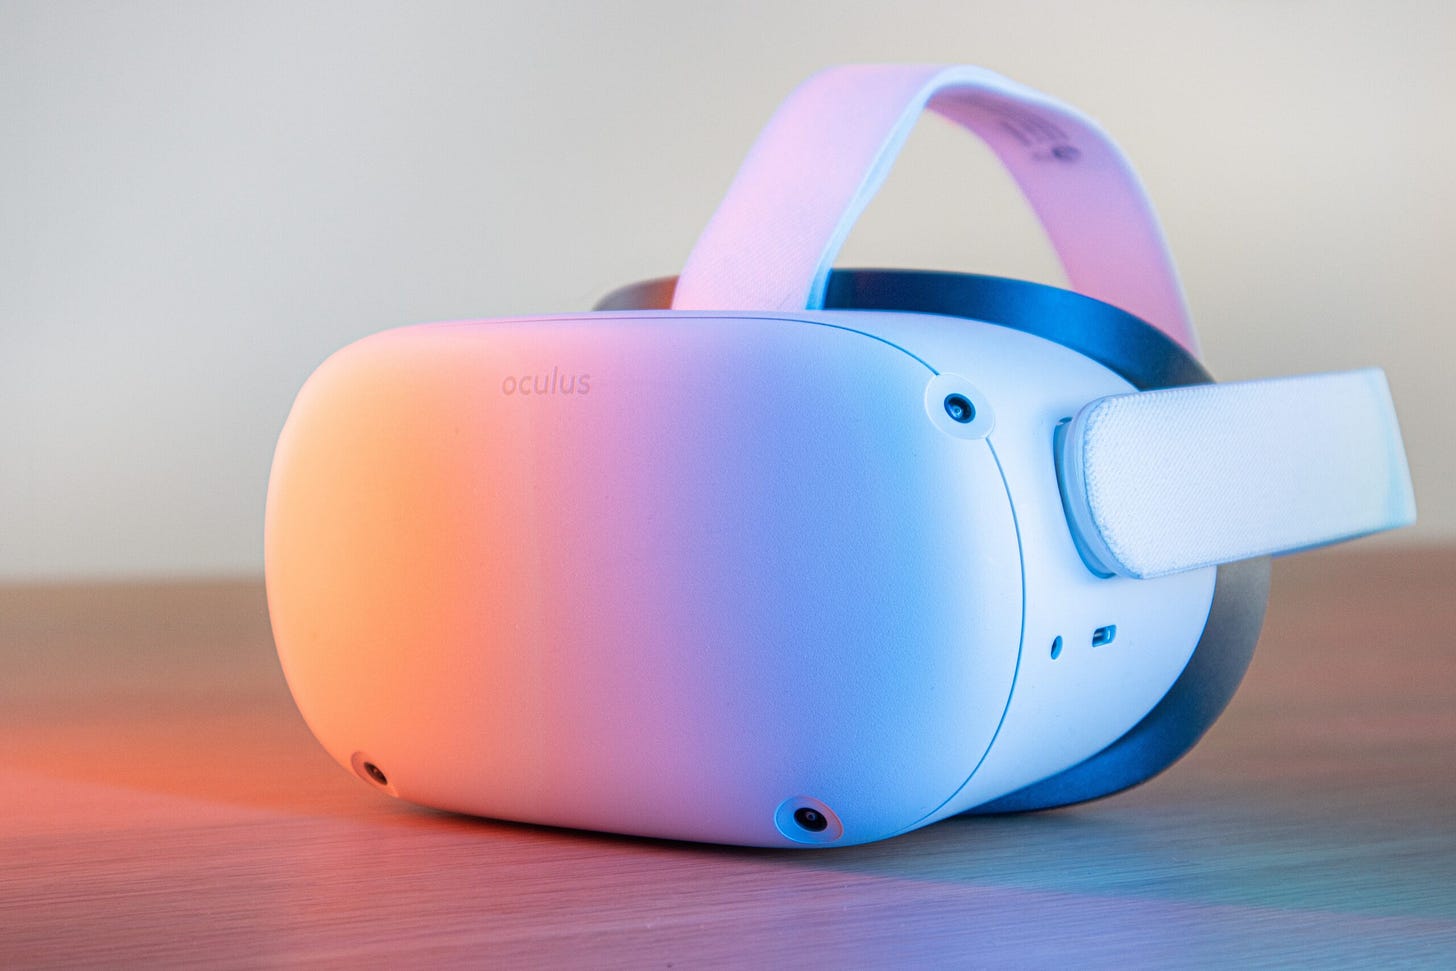 Pro says buy Meta stock after it lowered price of its VR headsets